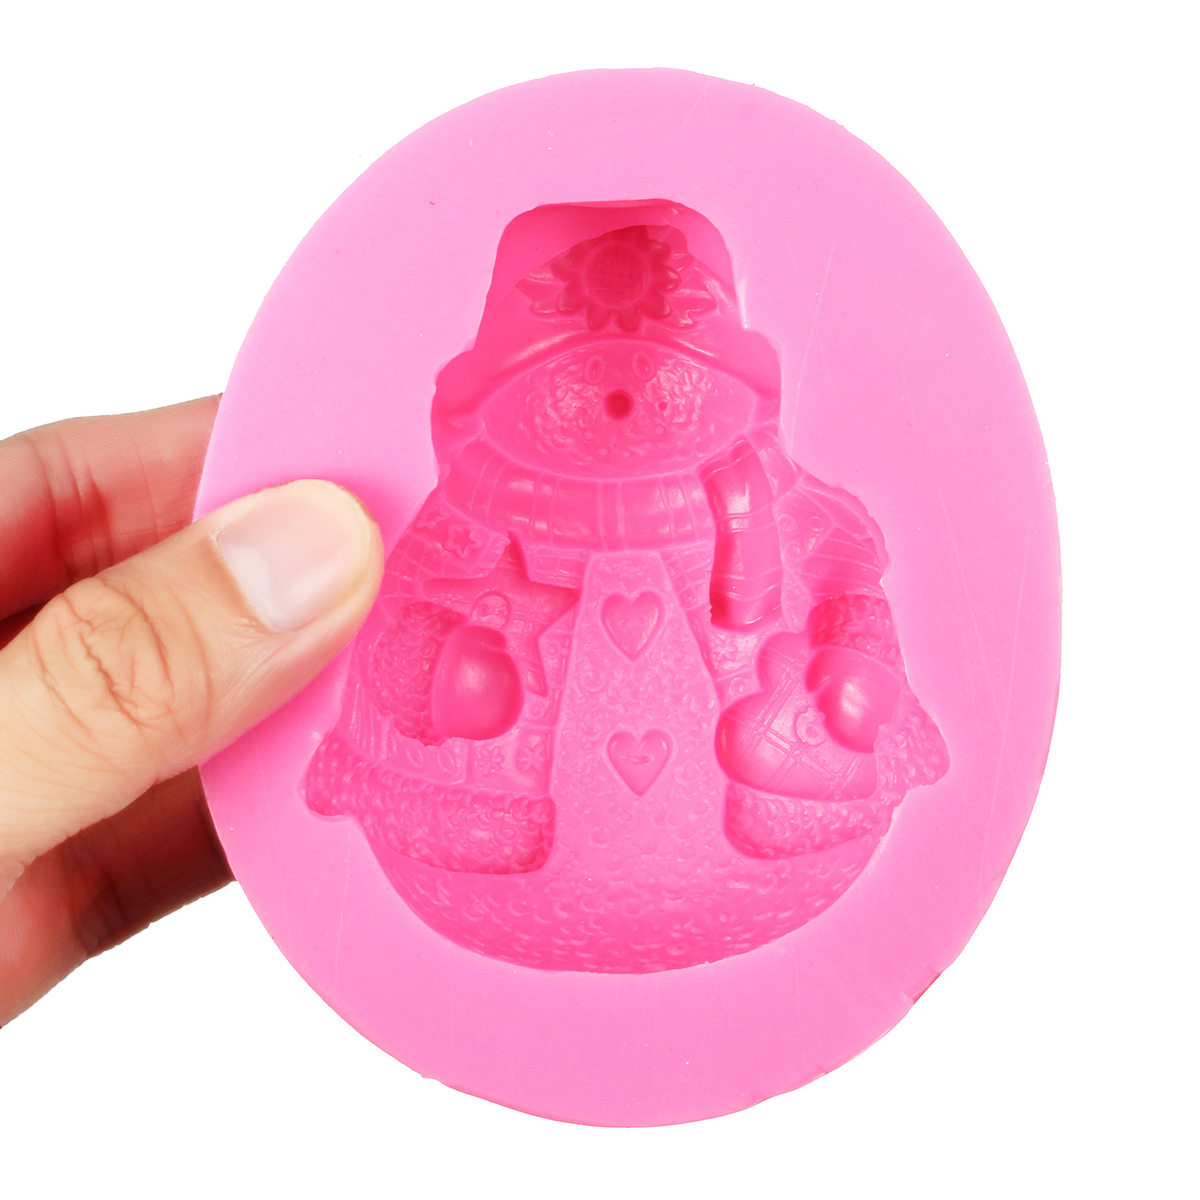 3D-Snowman-Silicone-Candle-Cake-Mold-Soap-Craft-Handmade-Decorating-Baking-Mold-Tools-1382540-2